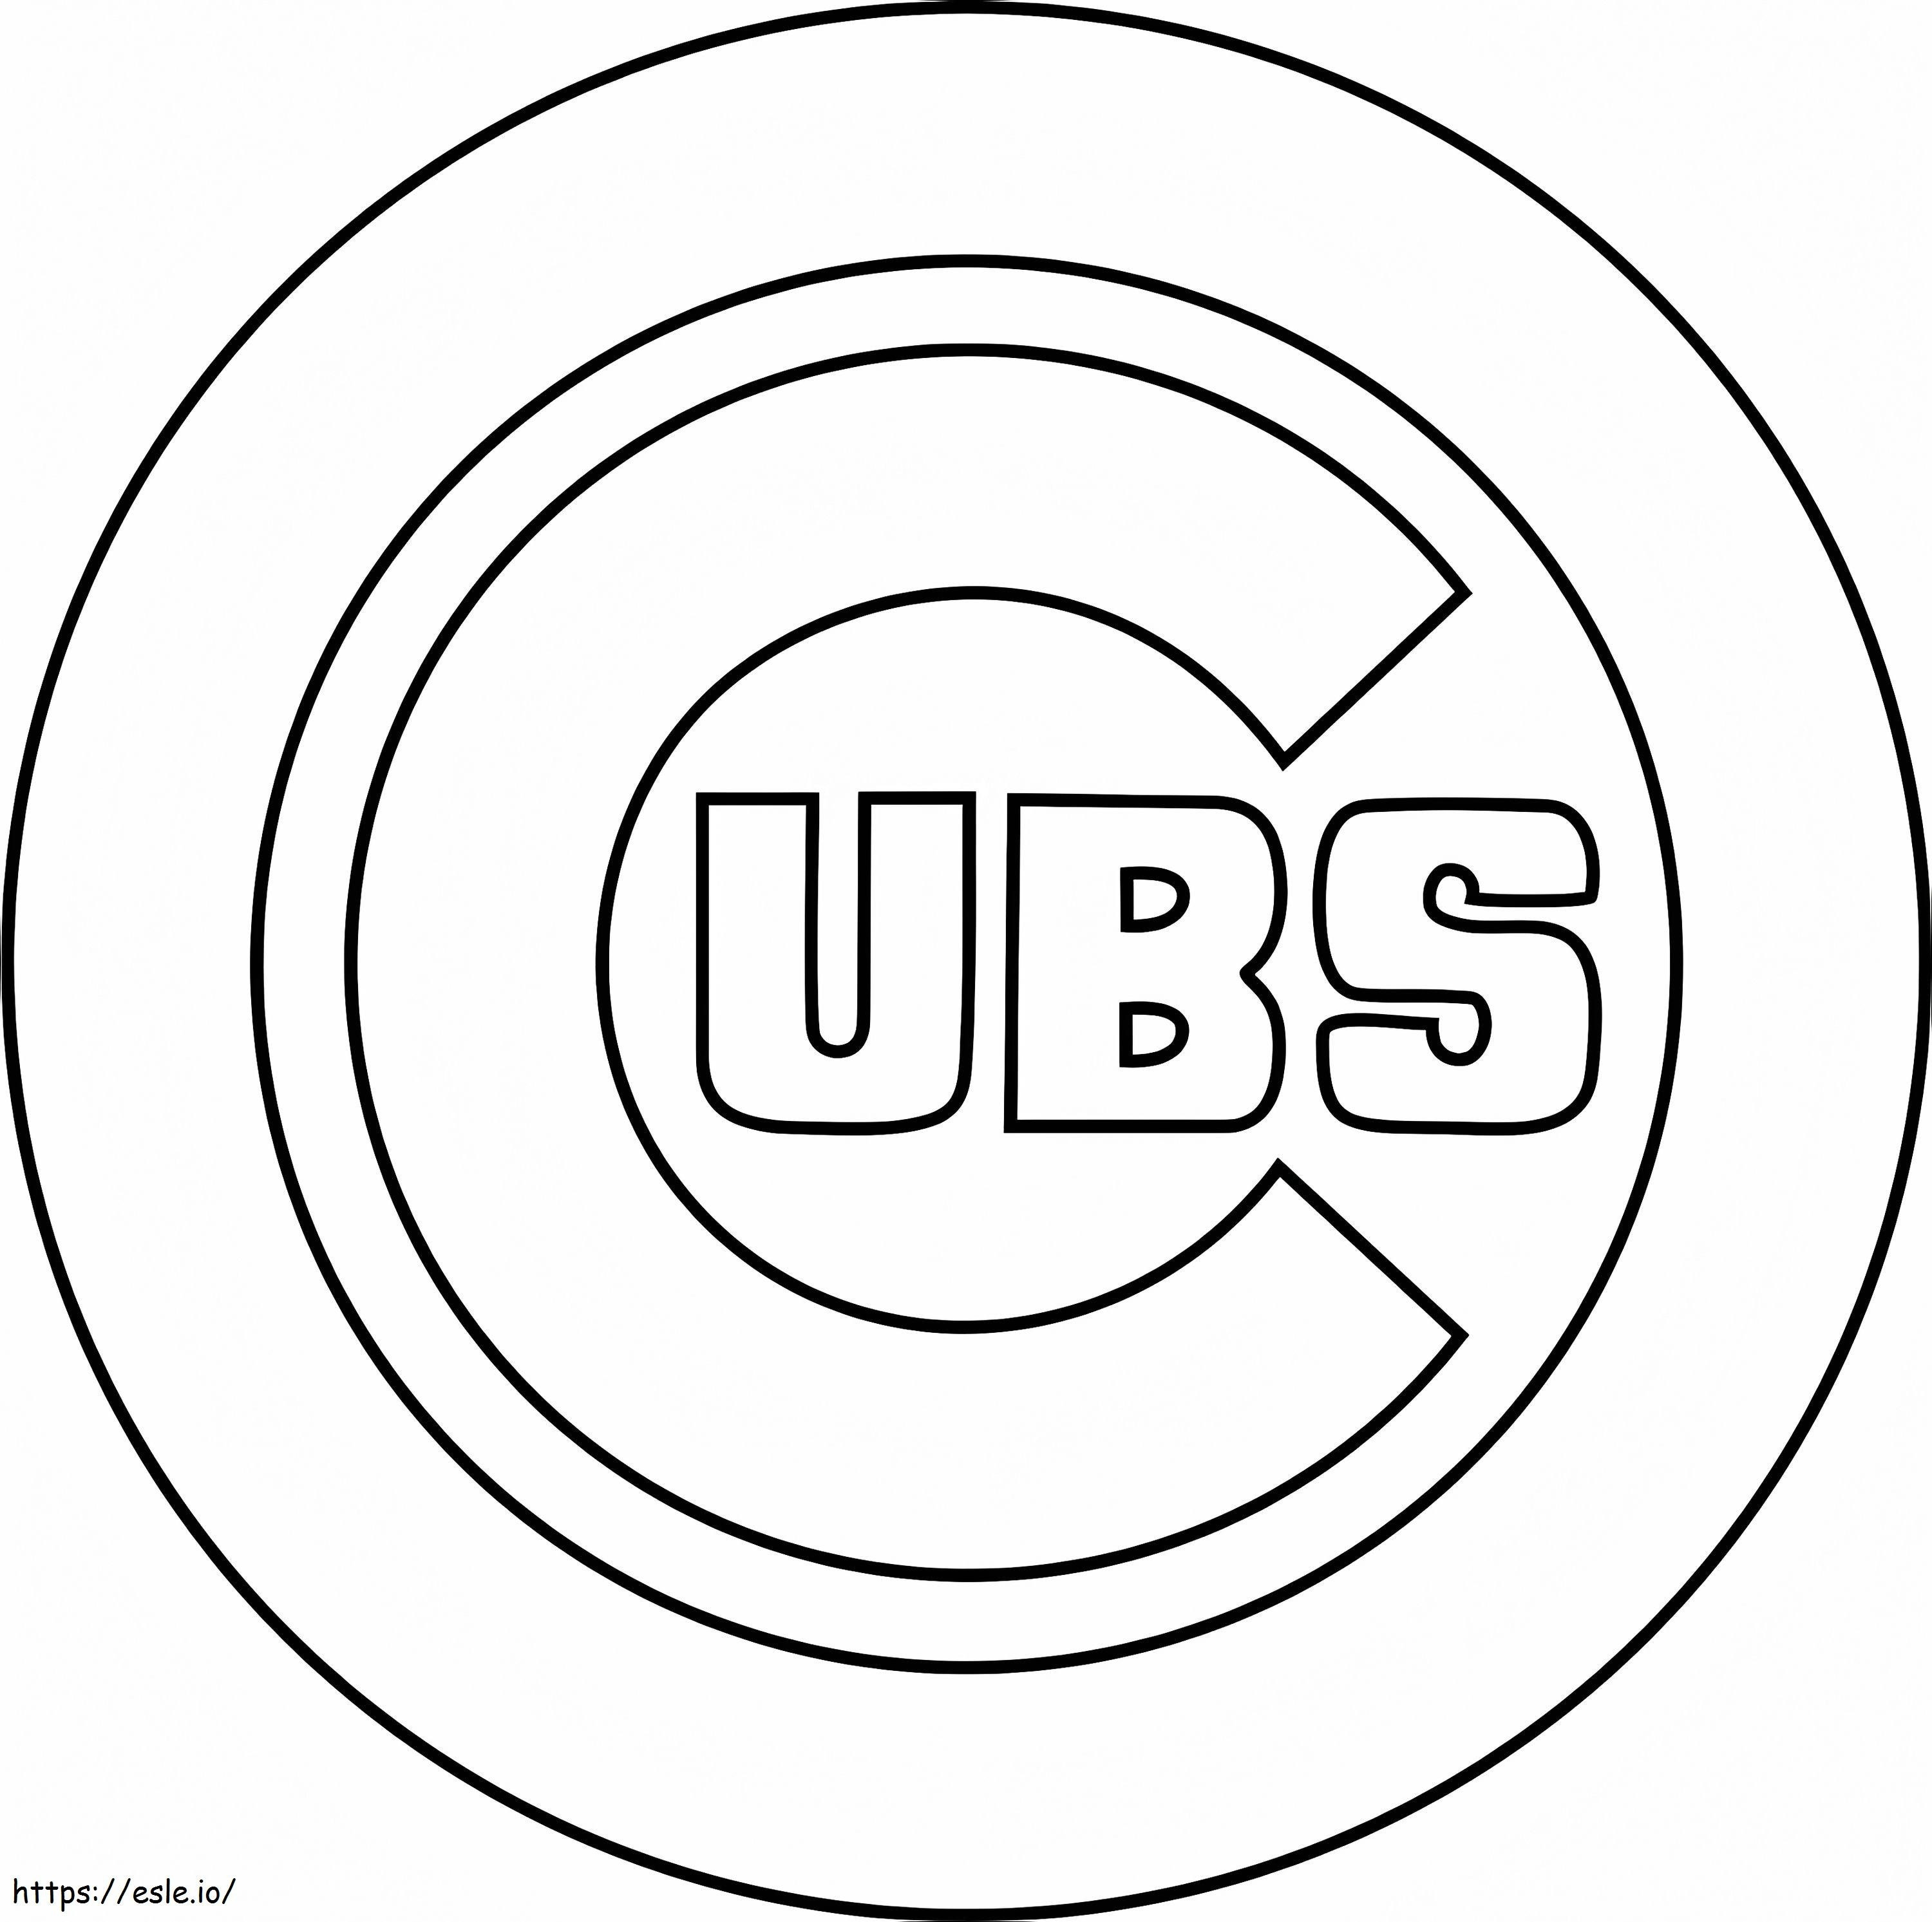 Chicago Cubs Logo coloring page